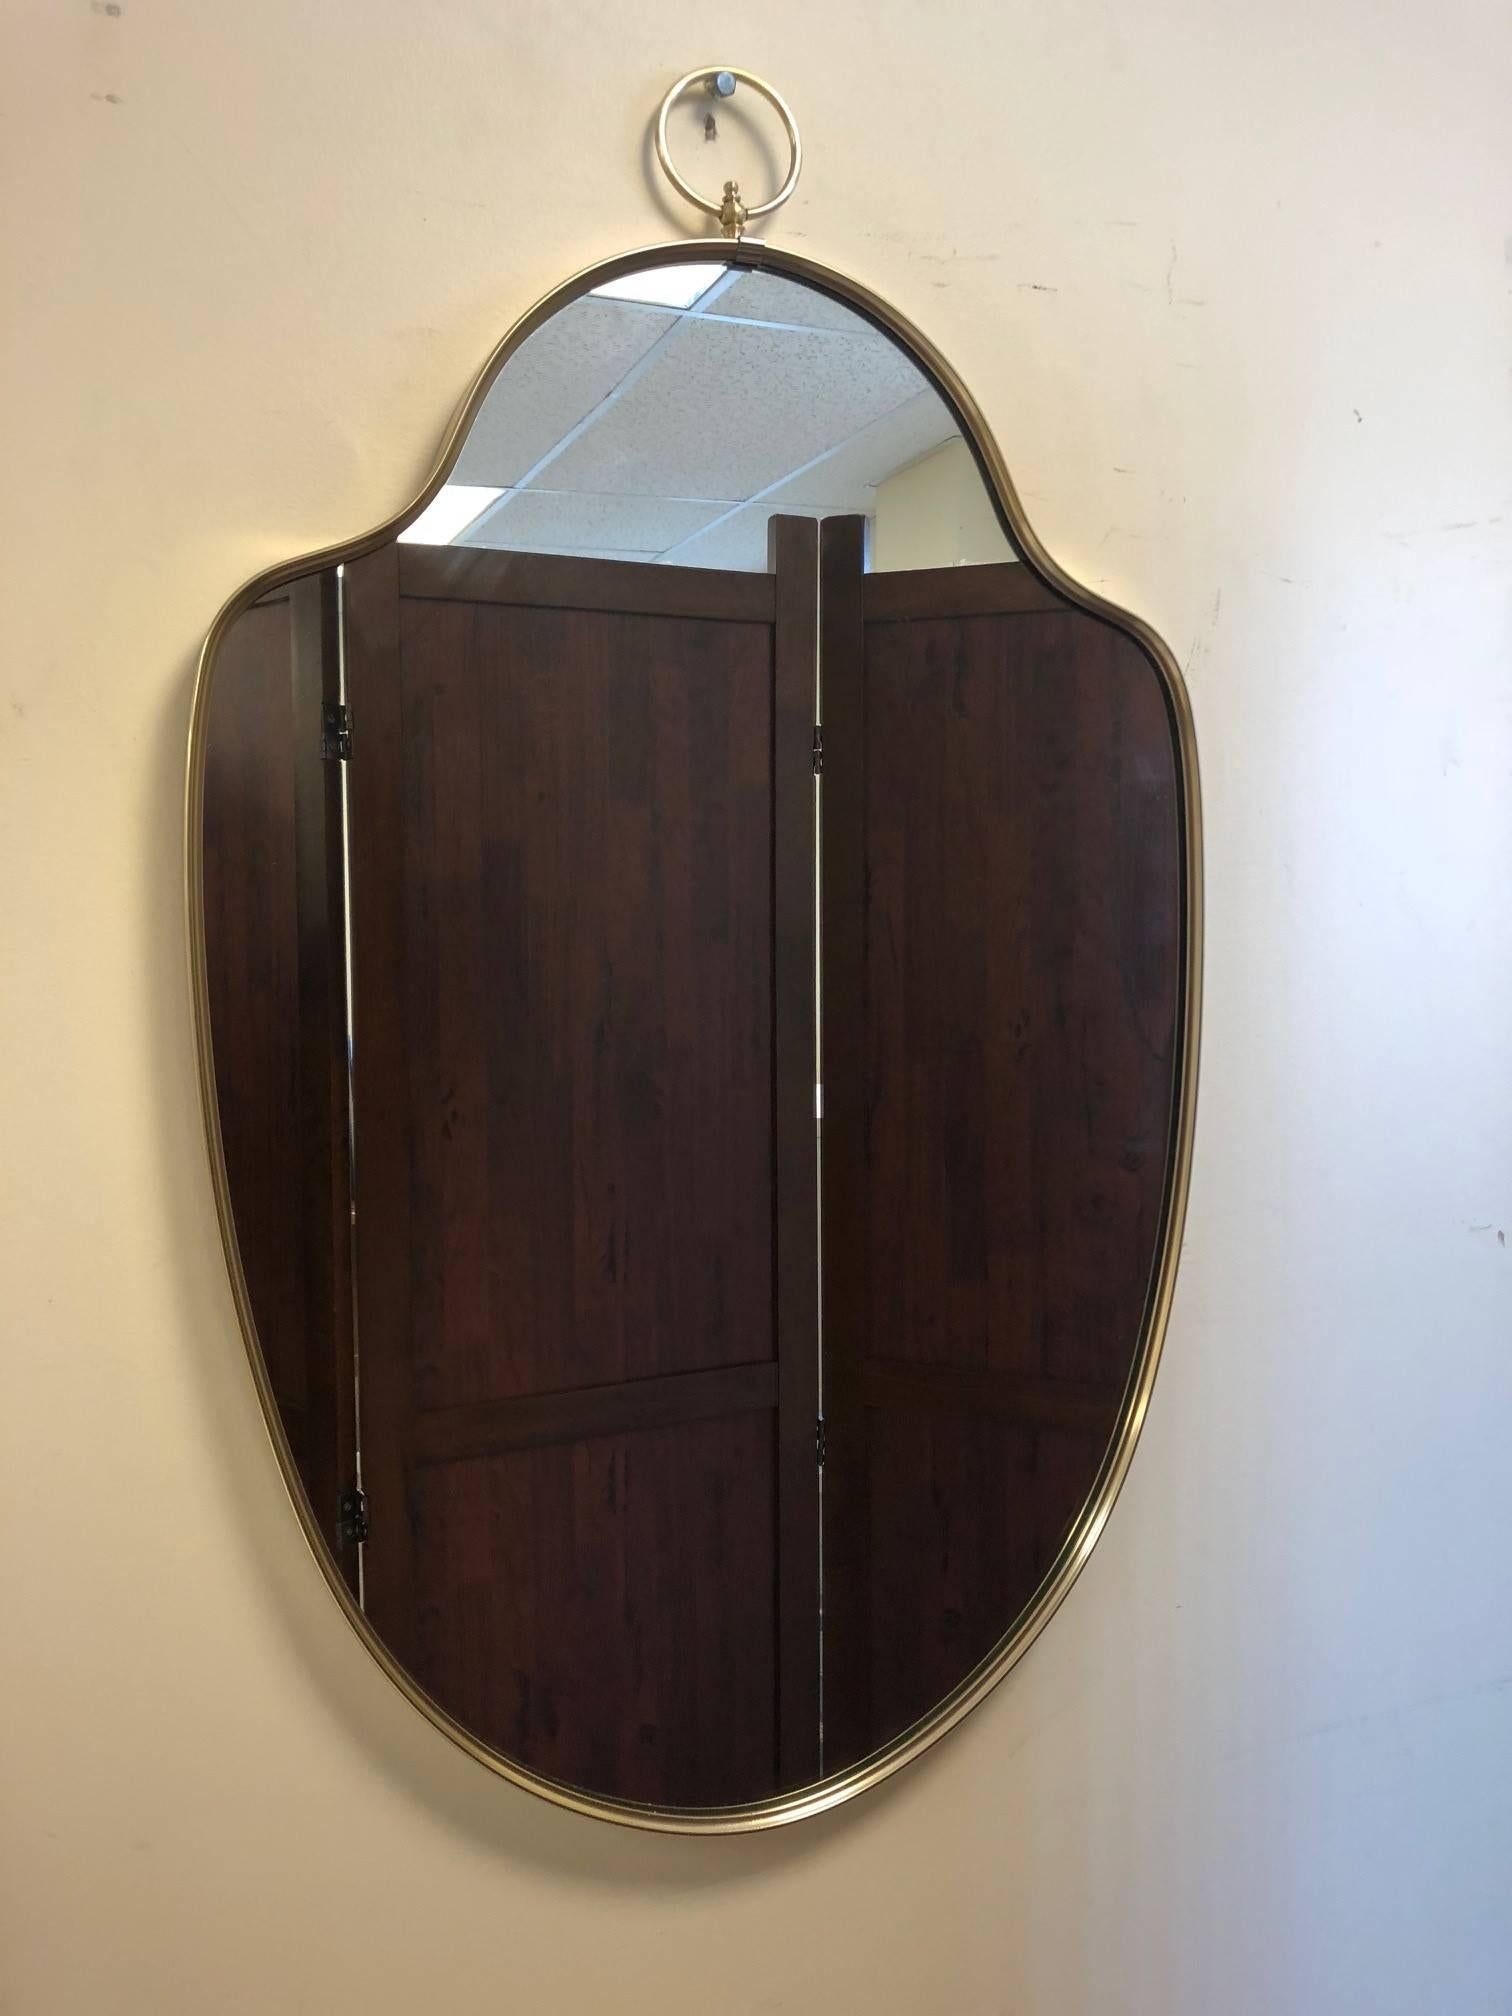 Hollywood Regency Italian Modernist Brass Mirror with a Decorative Ring at the Top For Sale